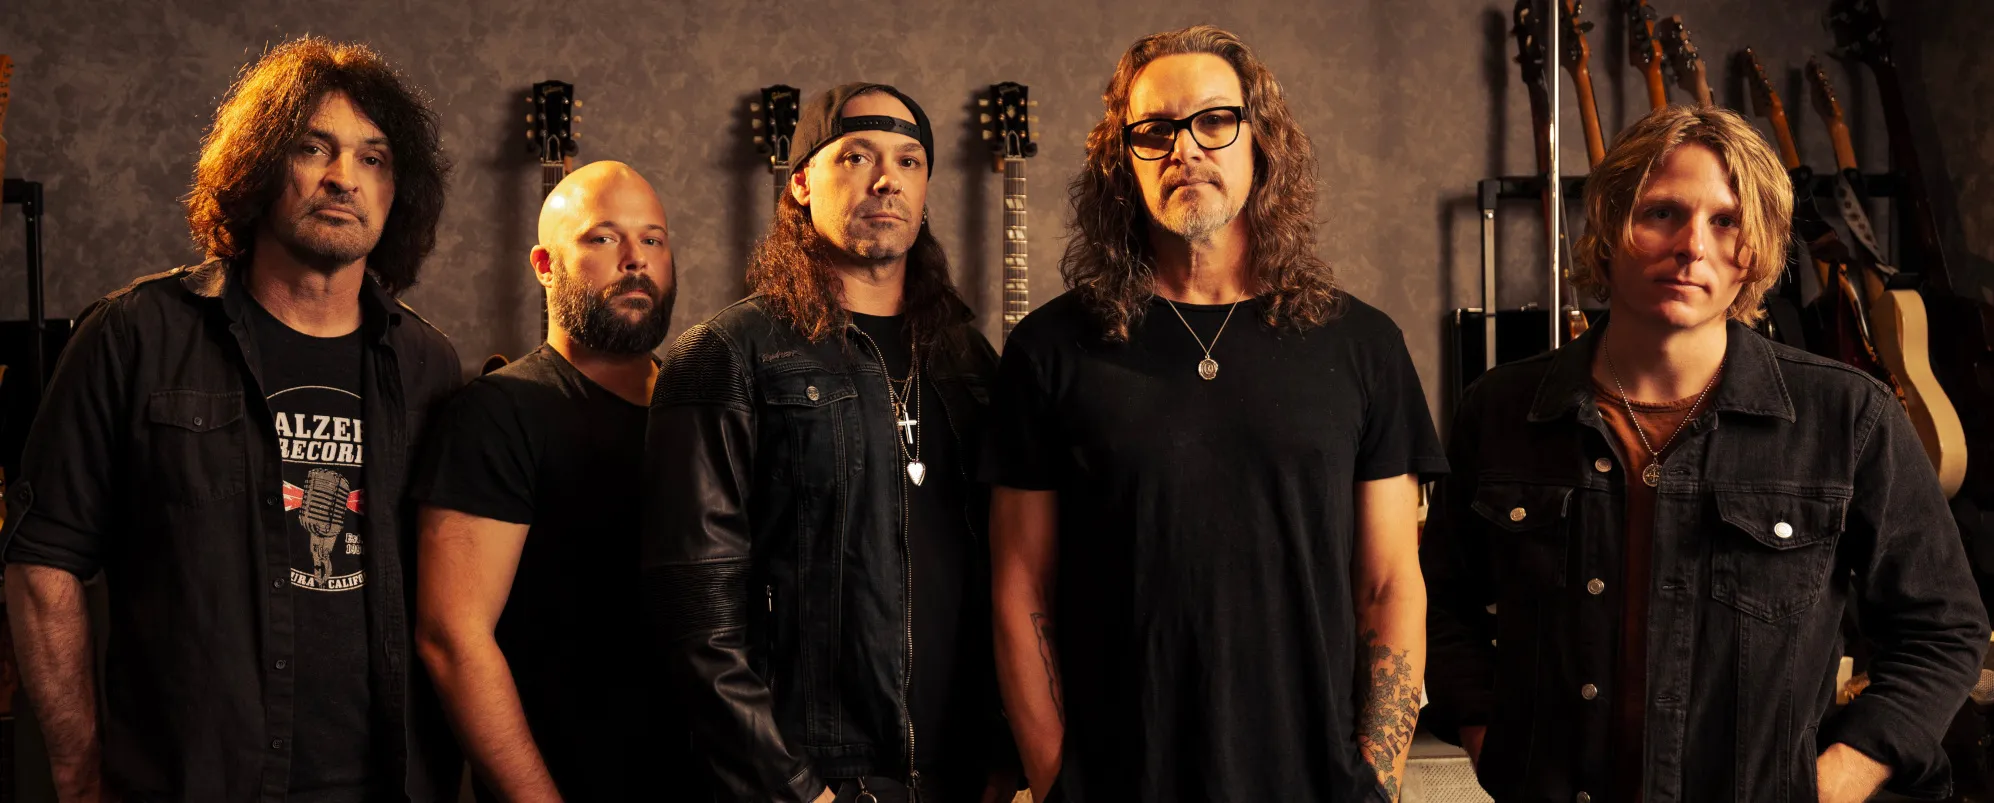 Kevin Martin Talks Grunge, the End of Candlebox  and New LP ‘The Long Goodbye’